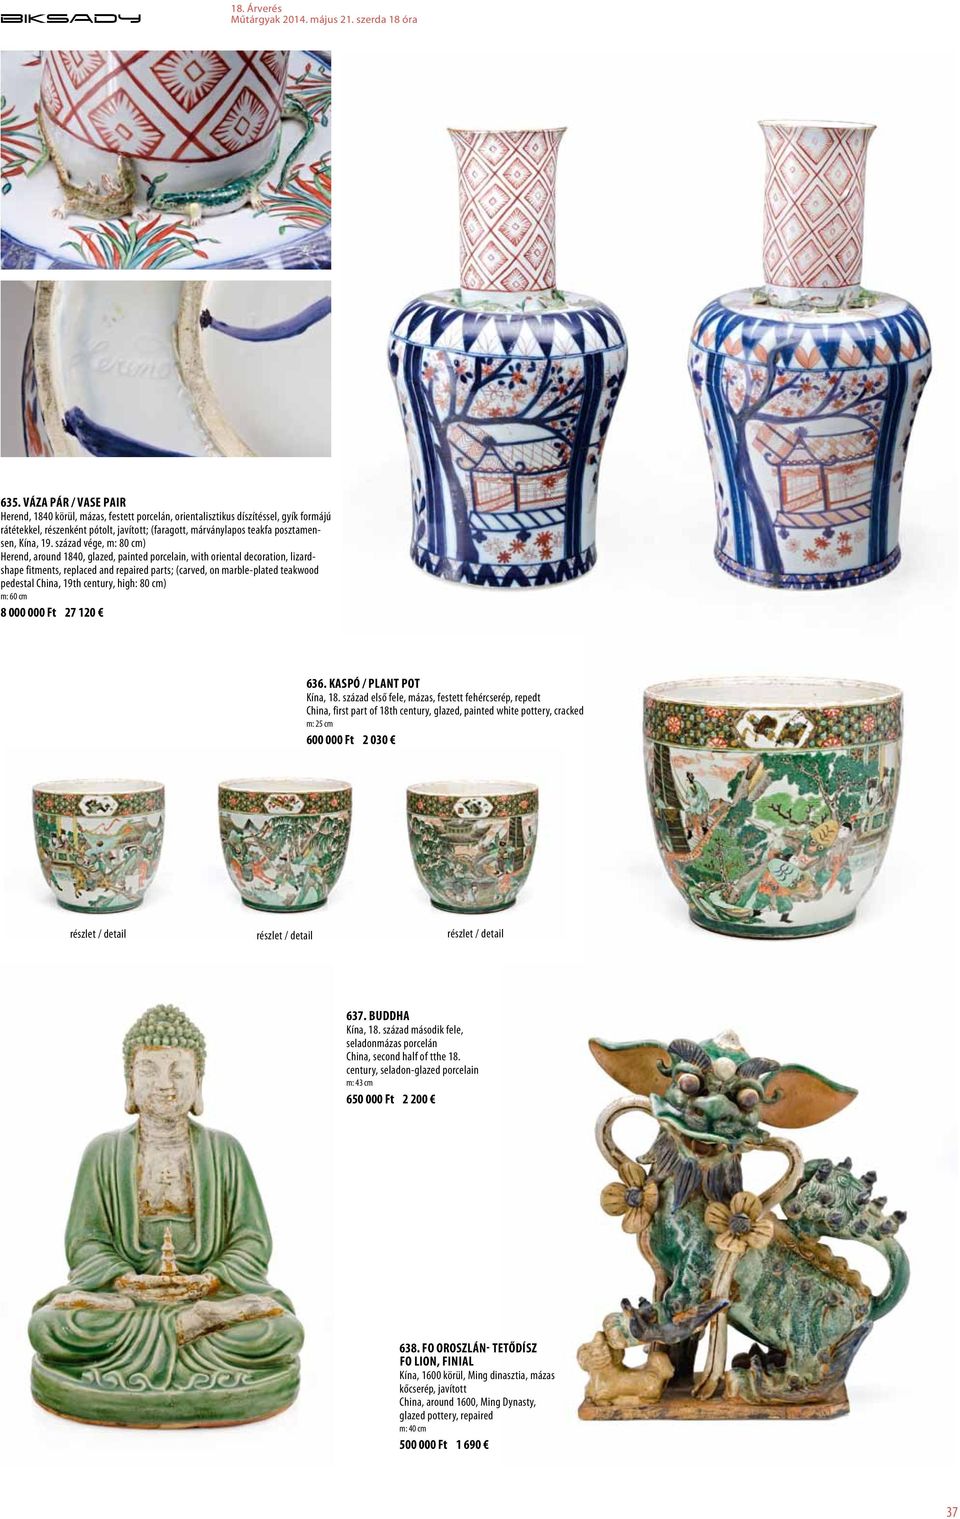 század vége, m: 80 cm) Herend, around 1840, glazed, painted porcelain, with oriental decoration, lizardshape fitments, replaced and repaired parts; (carved, on marble-plated teakwood pedestal China,